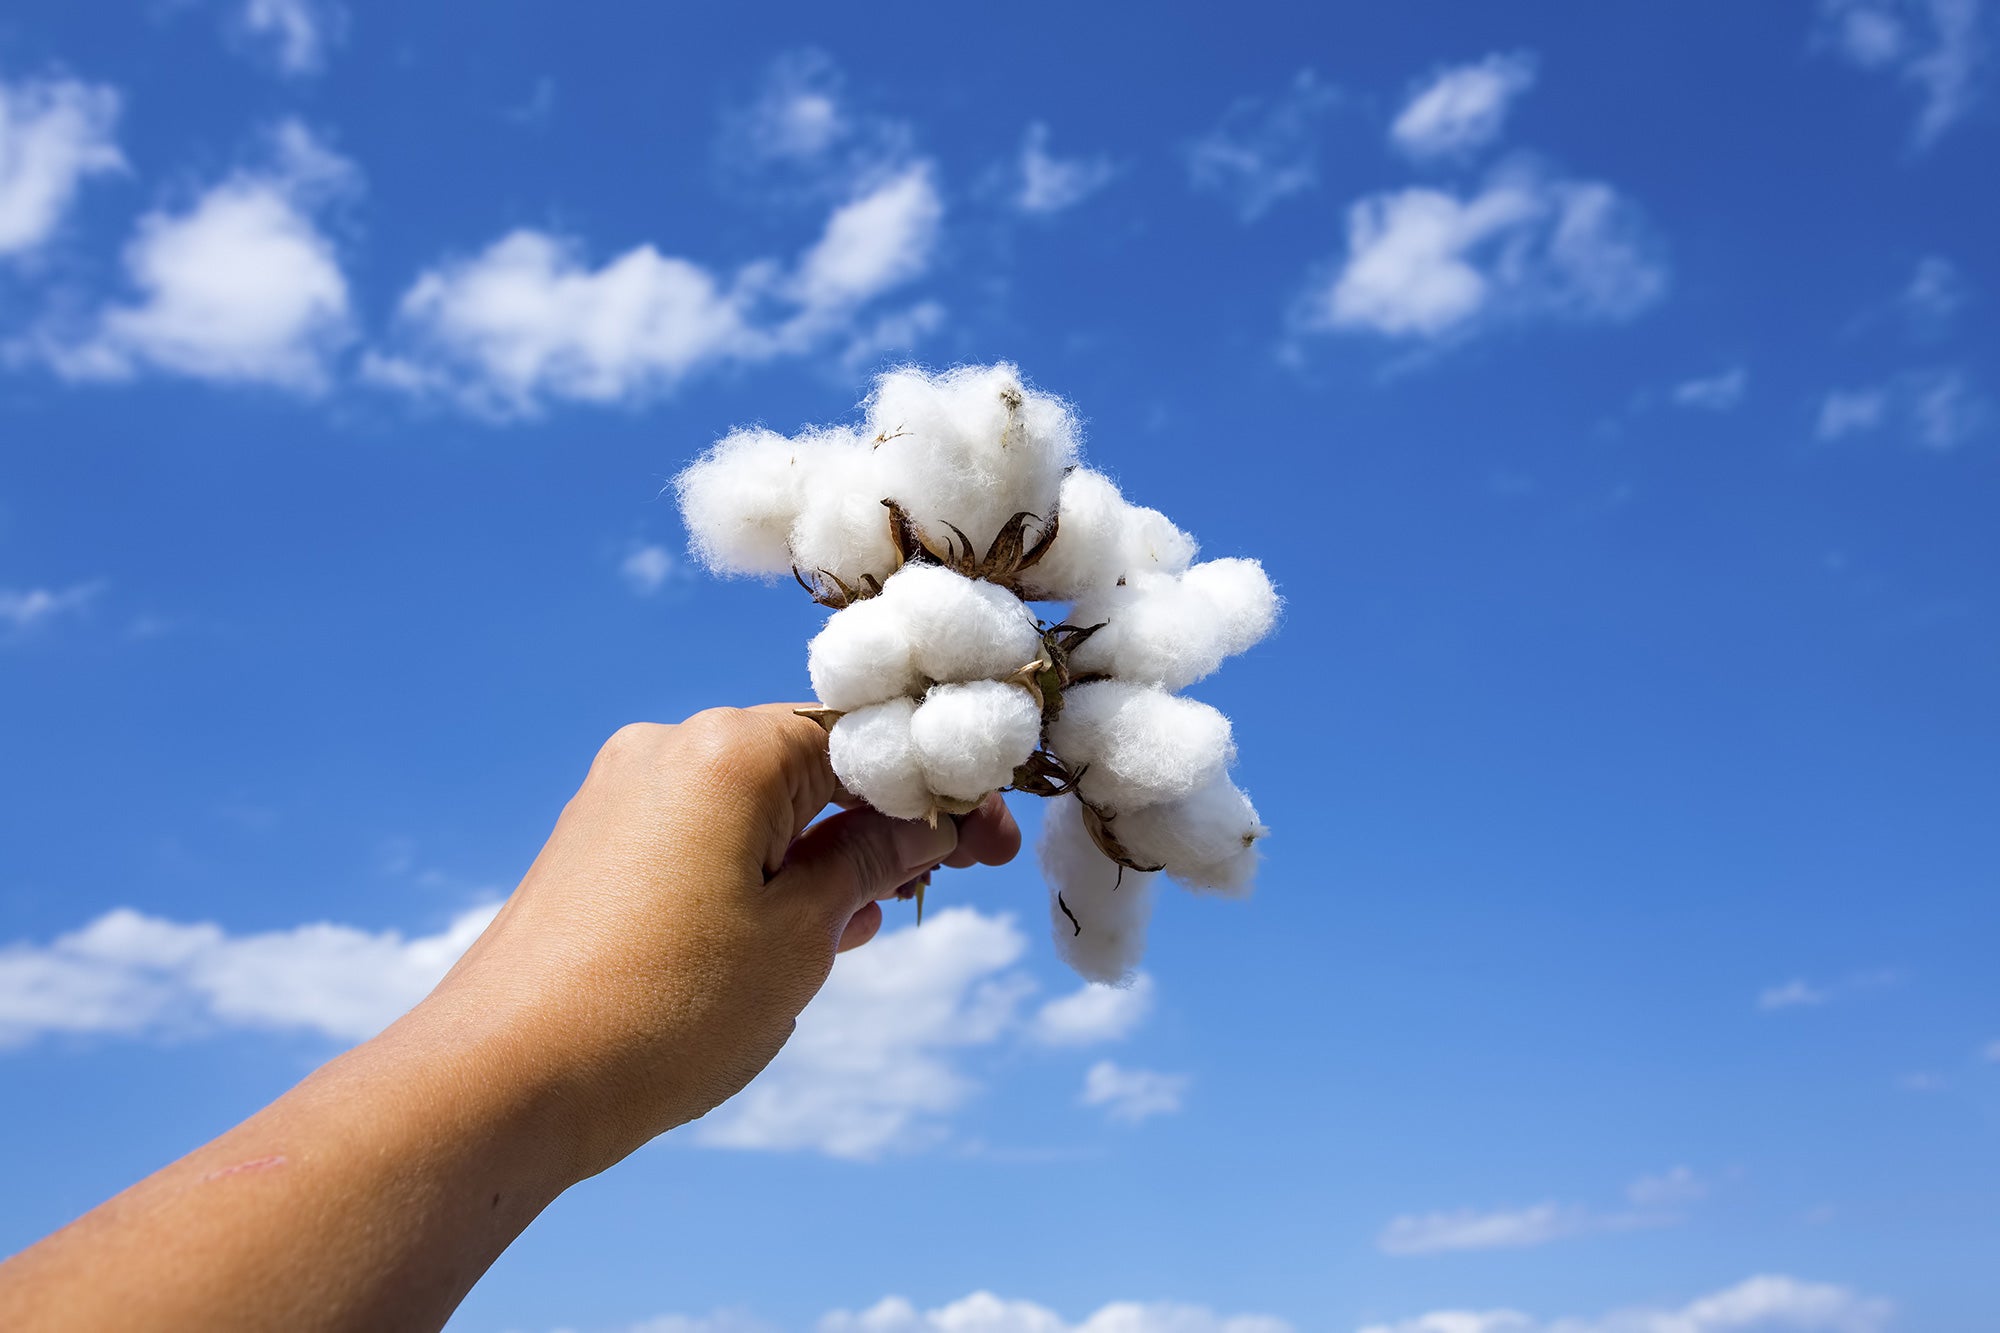 USDA researchers develop naturally fire-resistant cotton lines